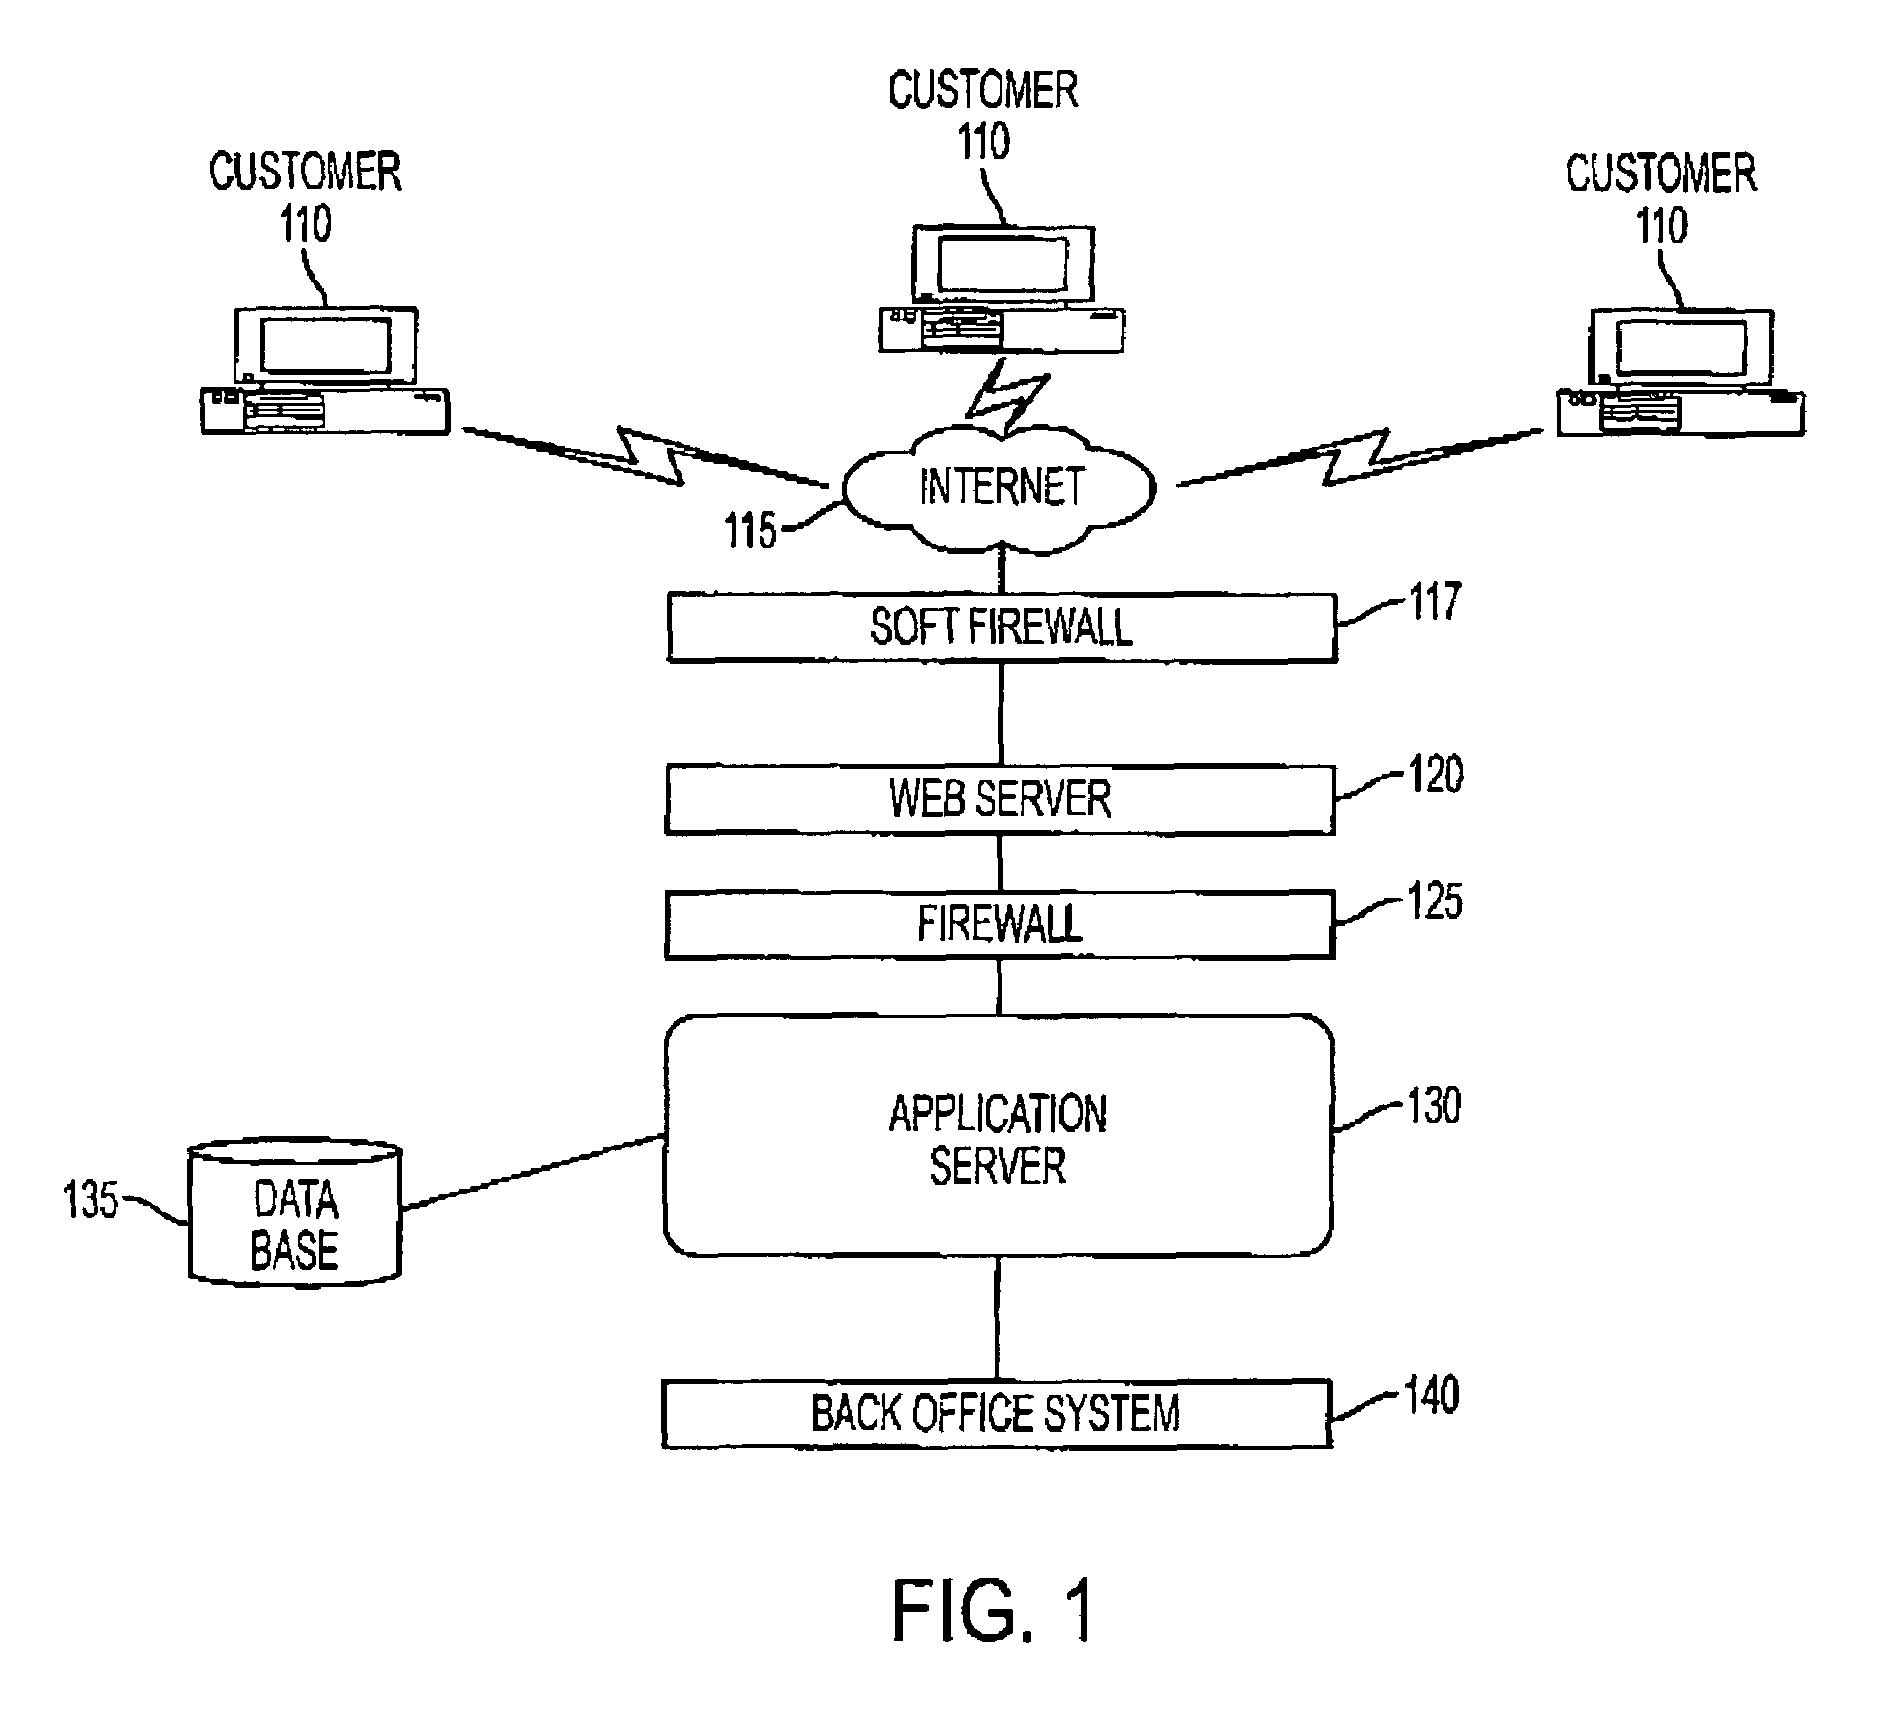 System and method for executing deposit transactions over the internet